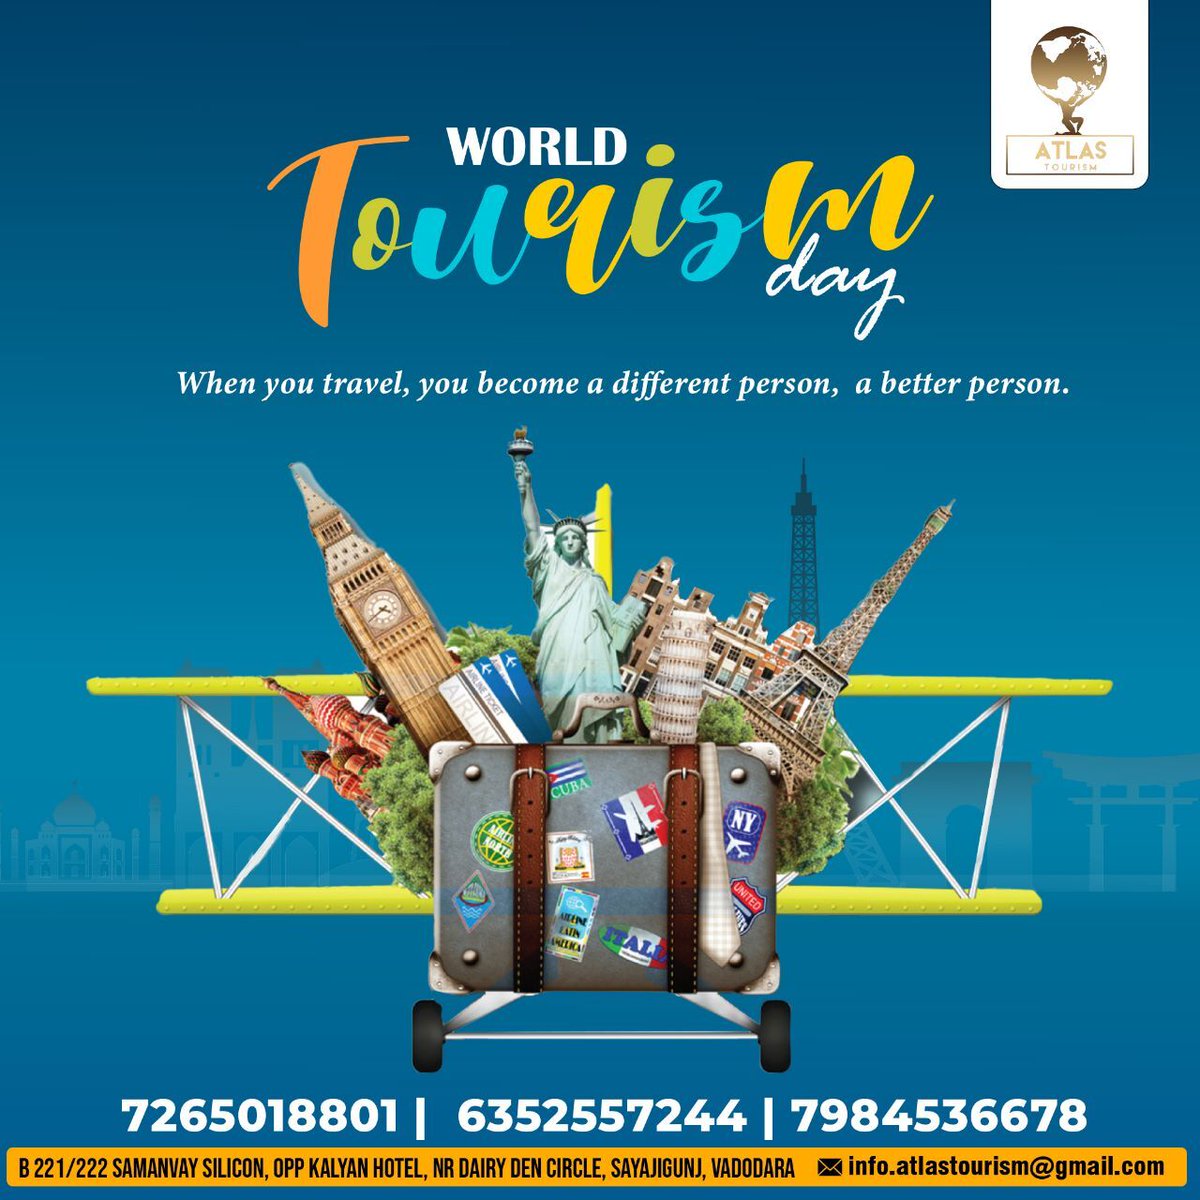 ✈️Travelling improves relations; this world tourism day, take your family outside and explore the beauty of our country.🧳

#atlastourism #tourism #travel #travelling #traveller #travelgram #travelblogger #worldtouristsday